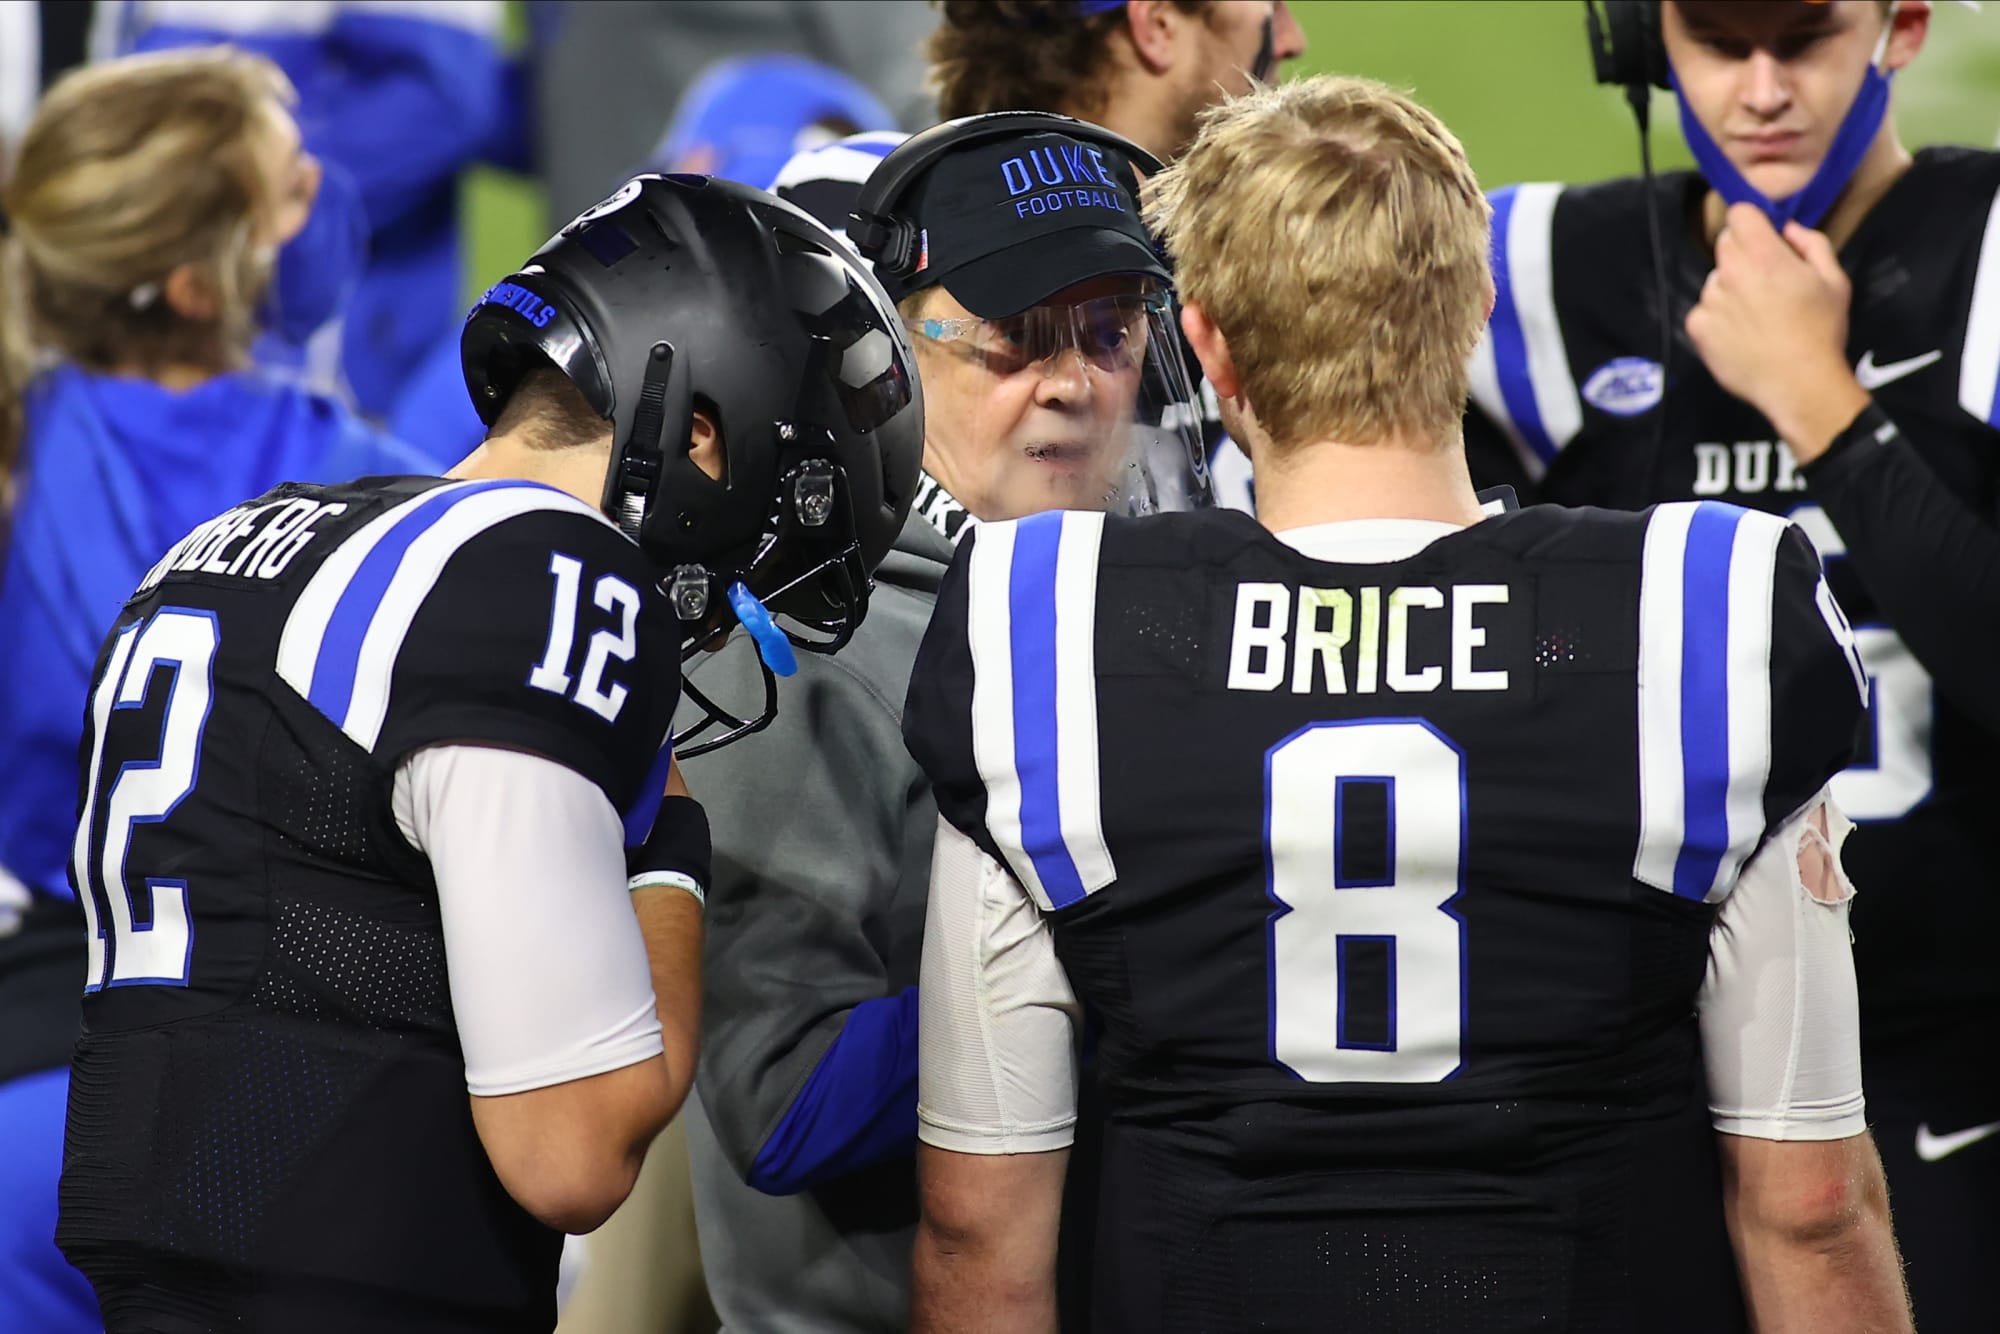 Duke football looking for signature victory in disappointing season